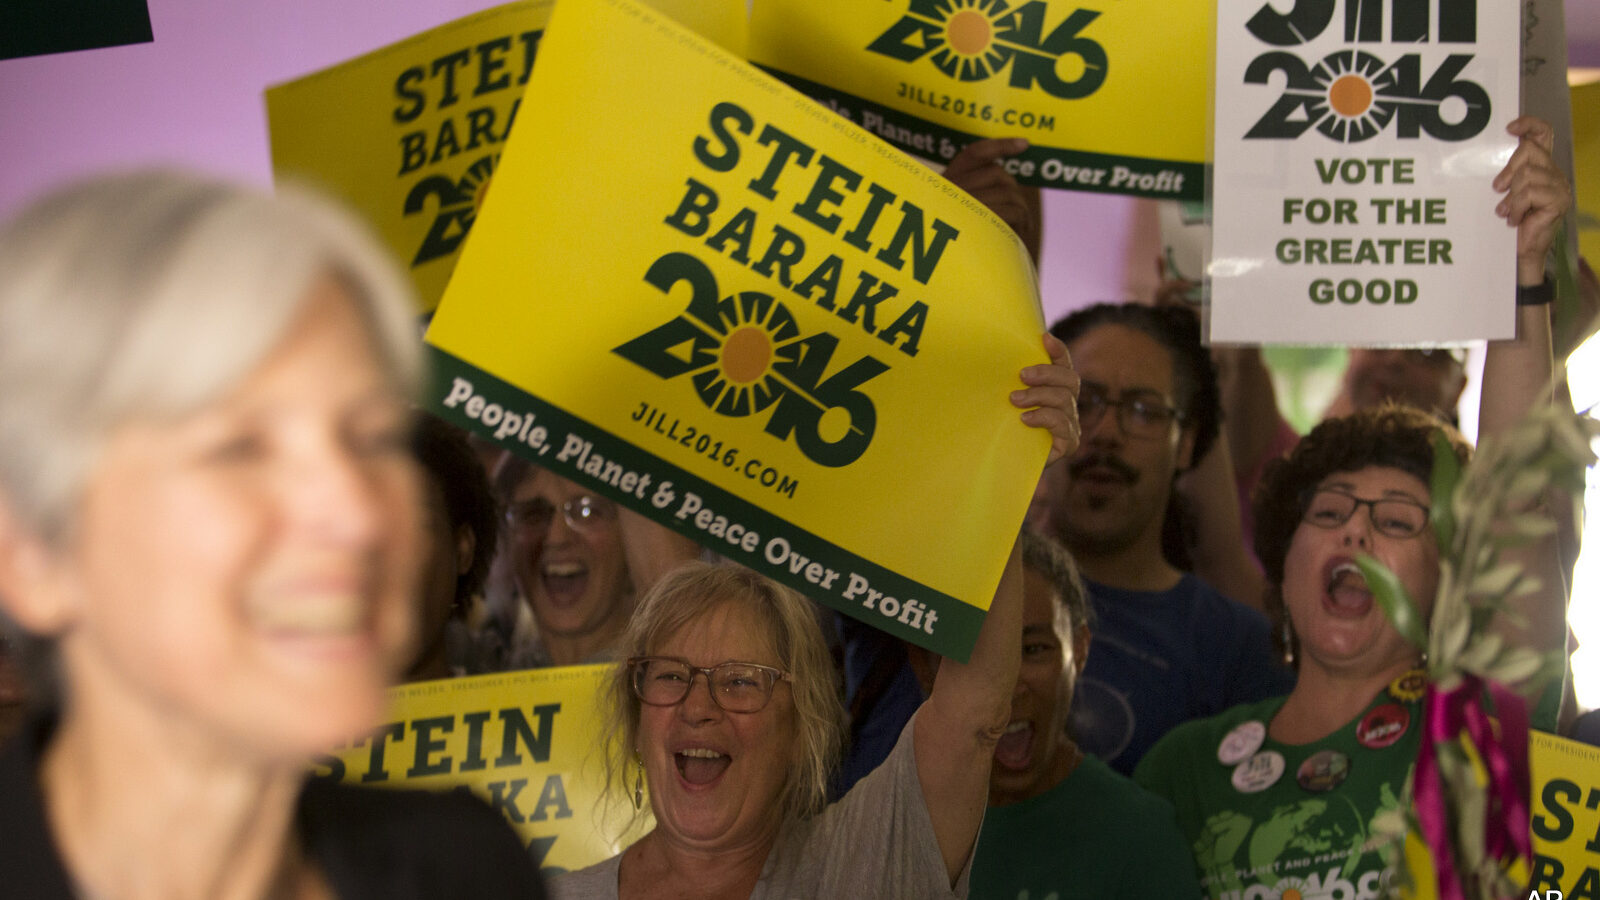 Green party presidential candidate Jill Stein, foreground, meets her supporters during a campaign stop at Humanist Hall in Oakland, Calif. on Thursday, Oct. 6, 2016.